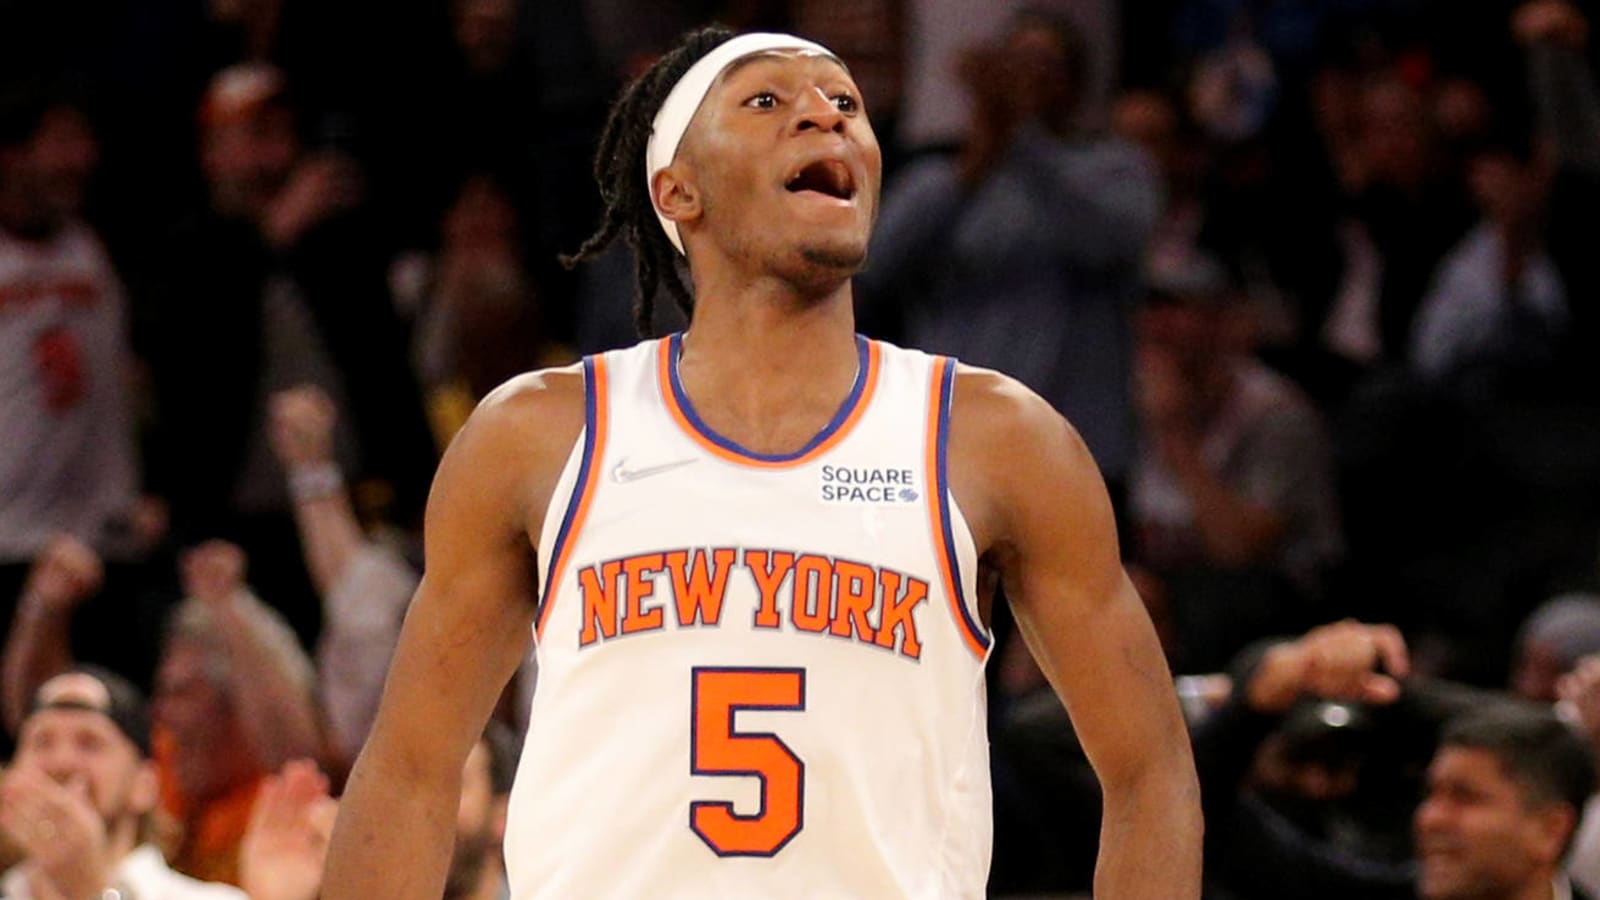 Four point guard options for the Knicks after Derrick Rose injury